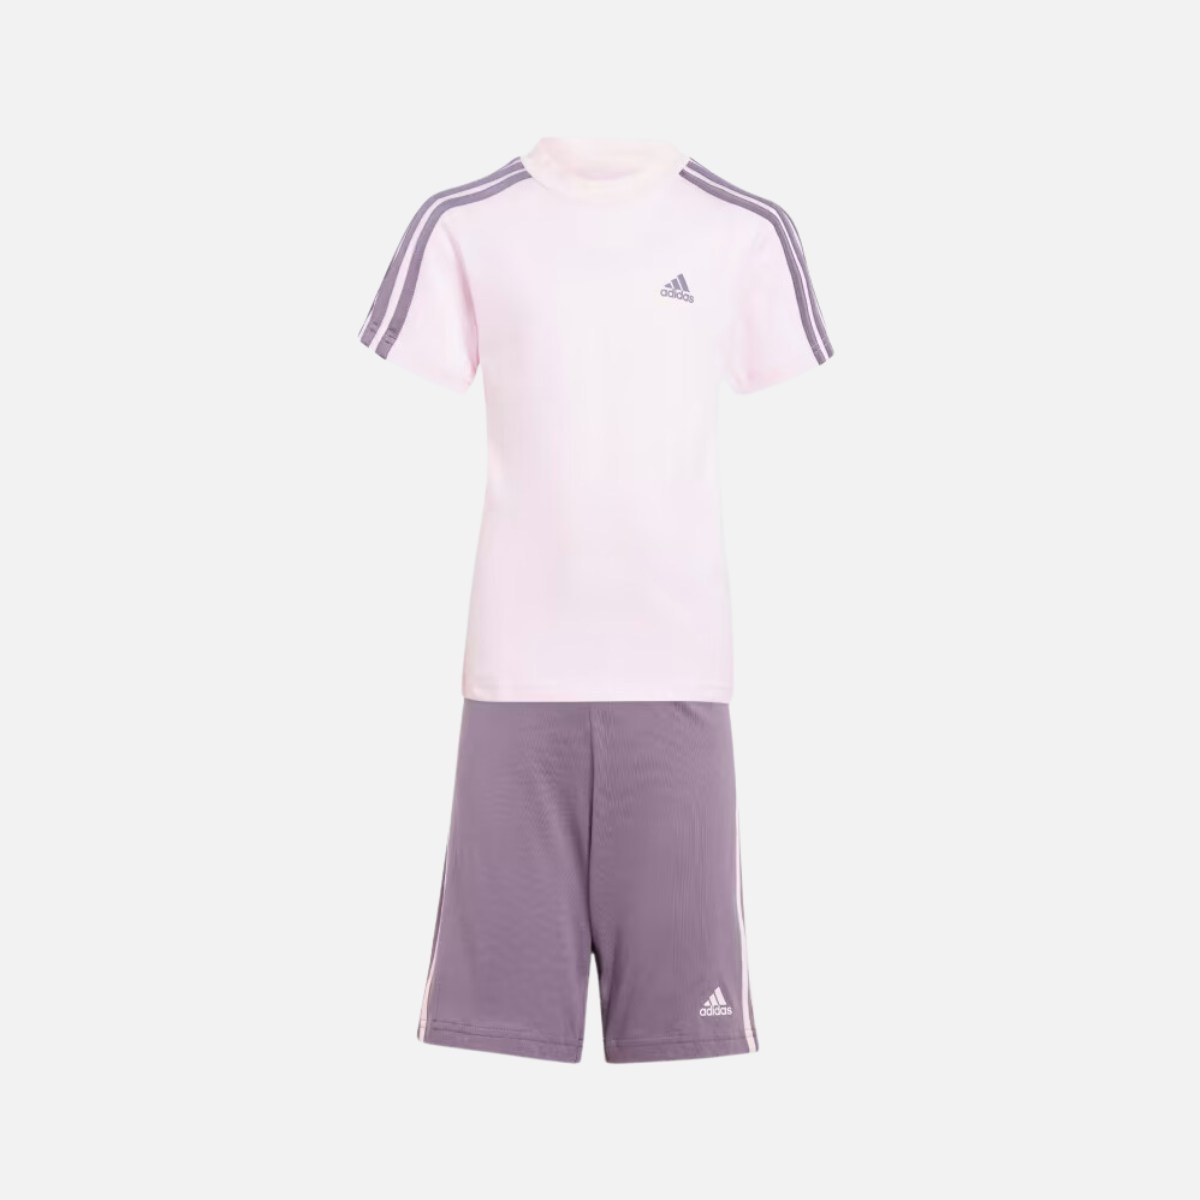 Adidas Essential 3 Stripes Shorts And T-shirt Kids Set (3-8 Years) -Clear Pink